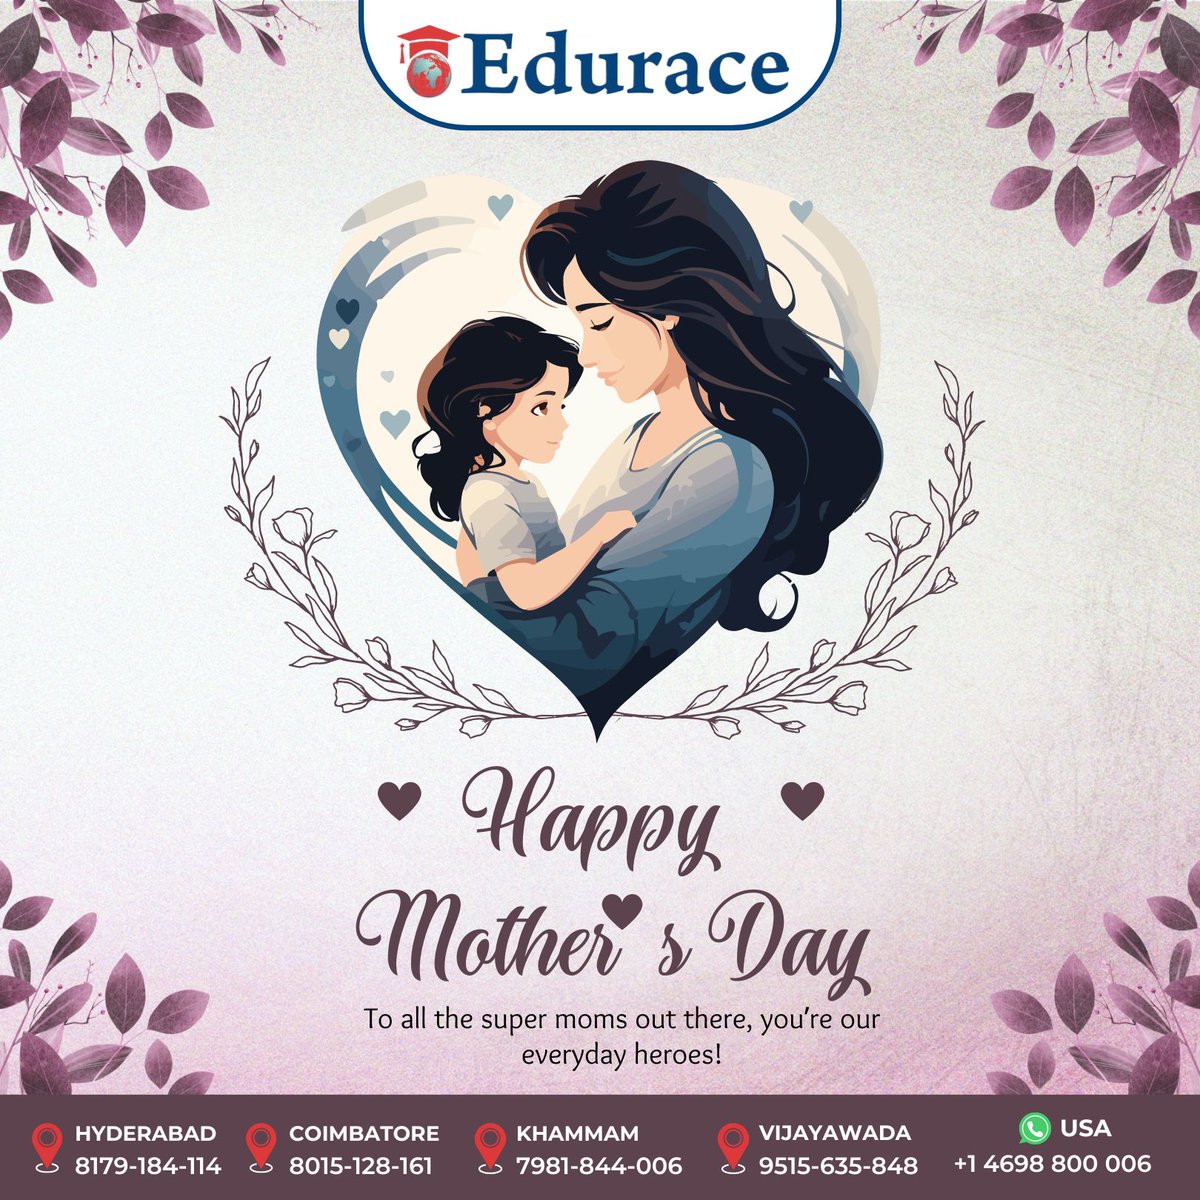 As we celebrate Mother's Day 2024, let us take the time to express our love,
appreciation, and gratitude to all the amazing mothers who enrich our lives with their presence, love, and sacrifice

#Mothersday2024 #happymothersday2024 #mother #motherhood #motherlove #eduraceservices